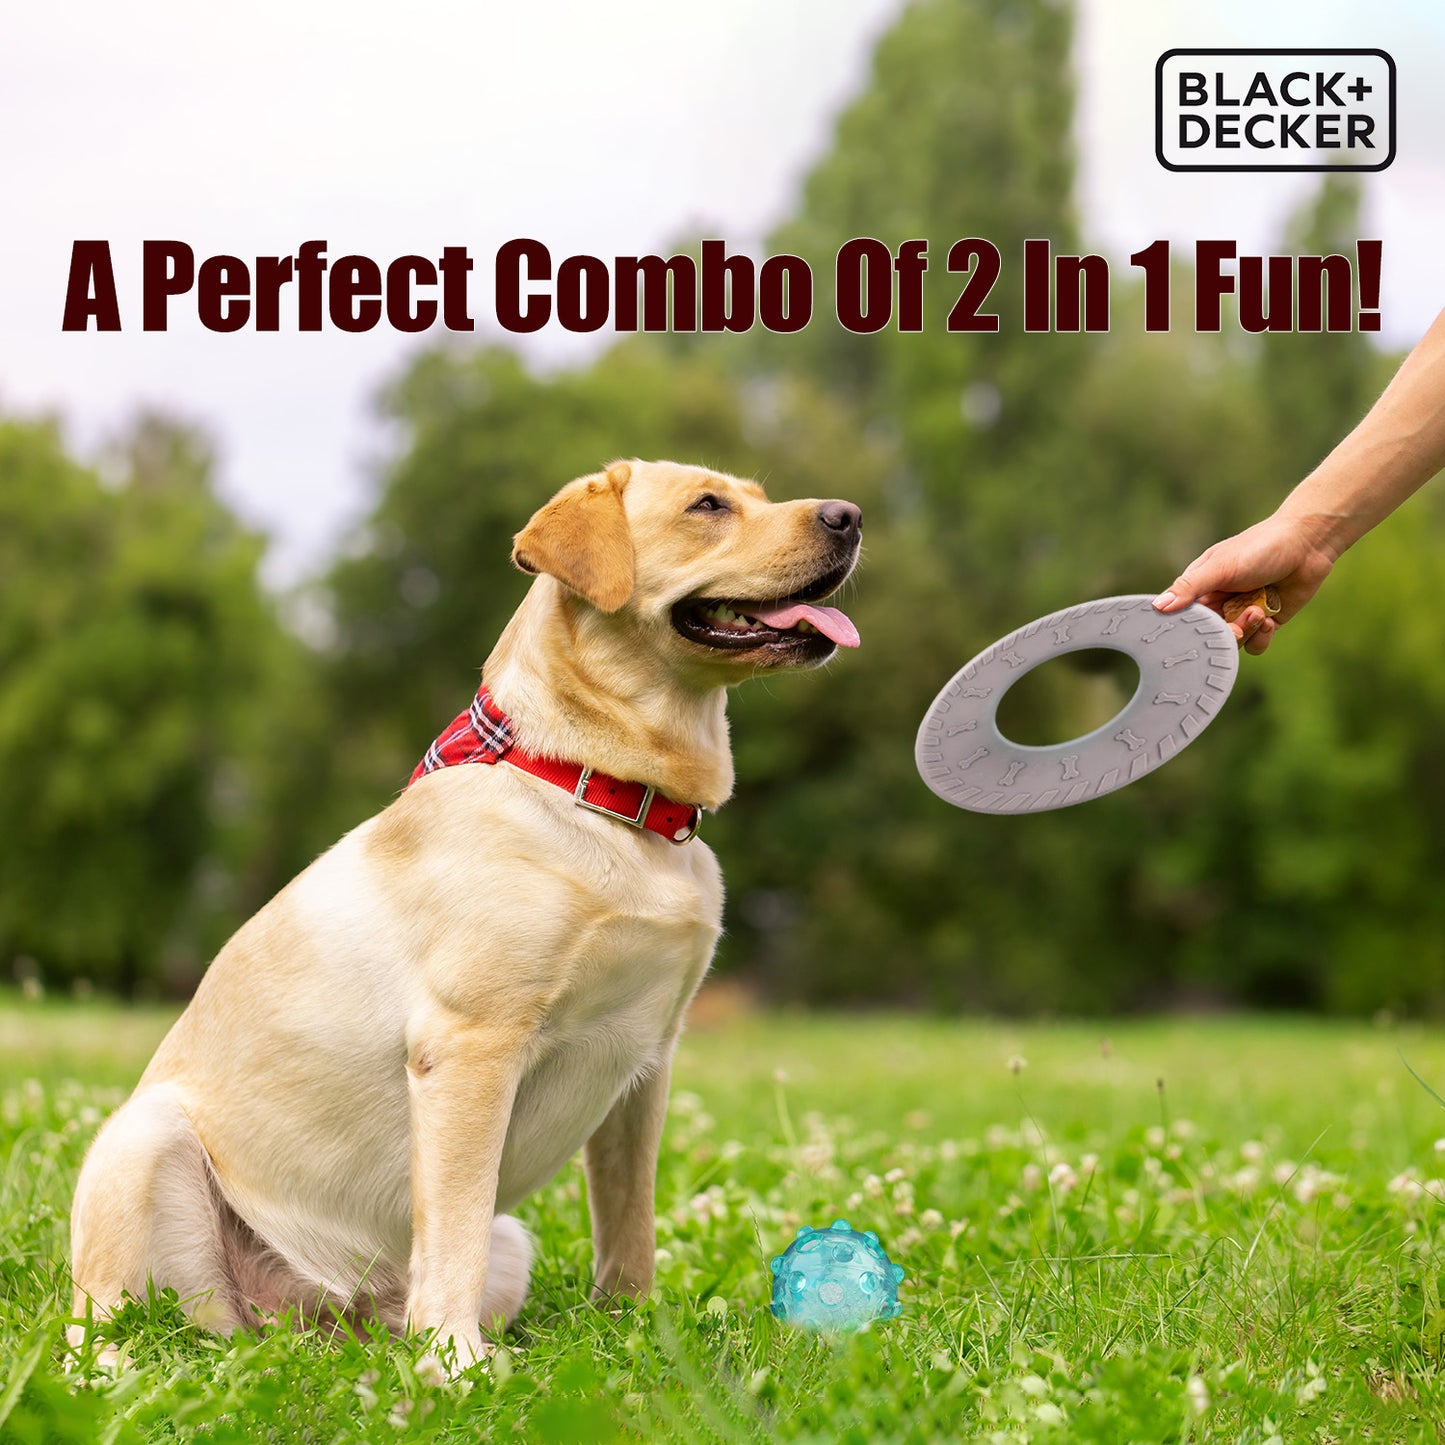 Black+Decker Flying Disk With Light Ball Fetch Toy For Dogs - Grey - Heads Up For Tails